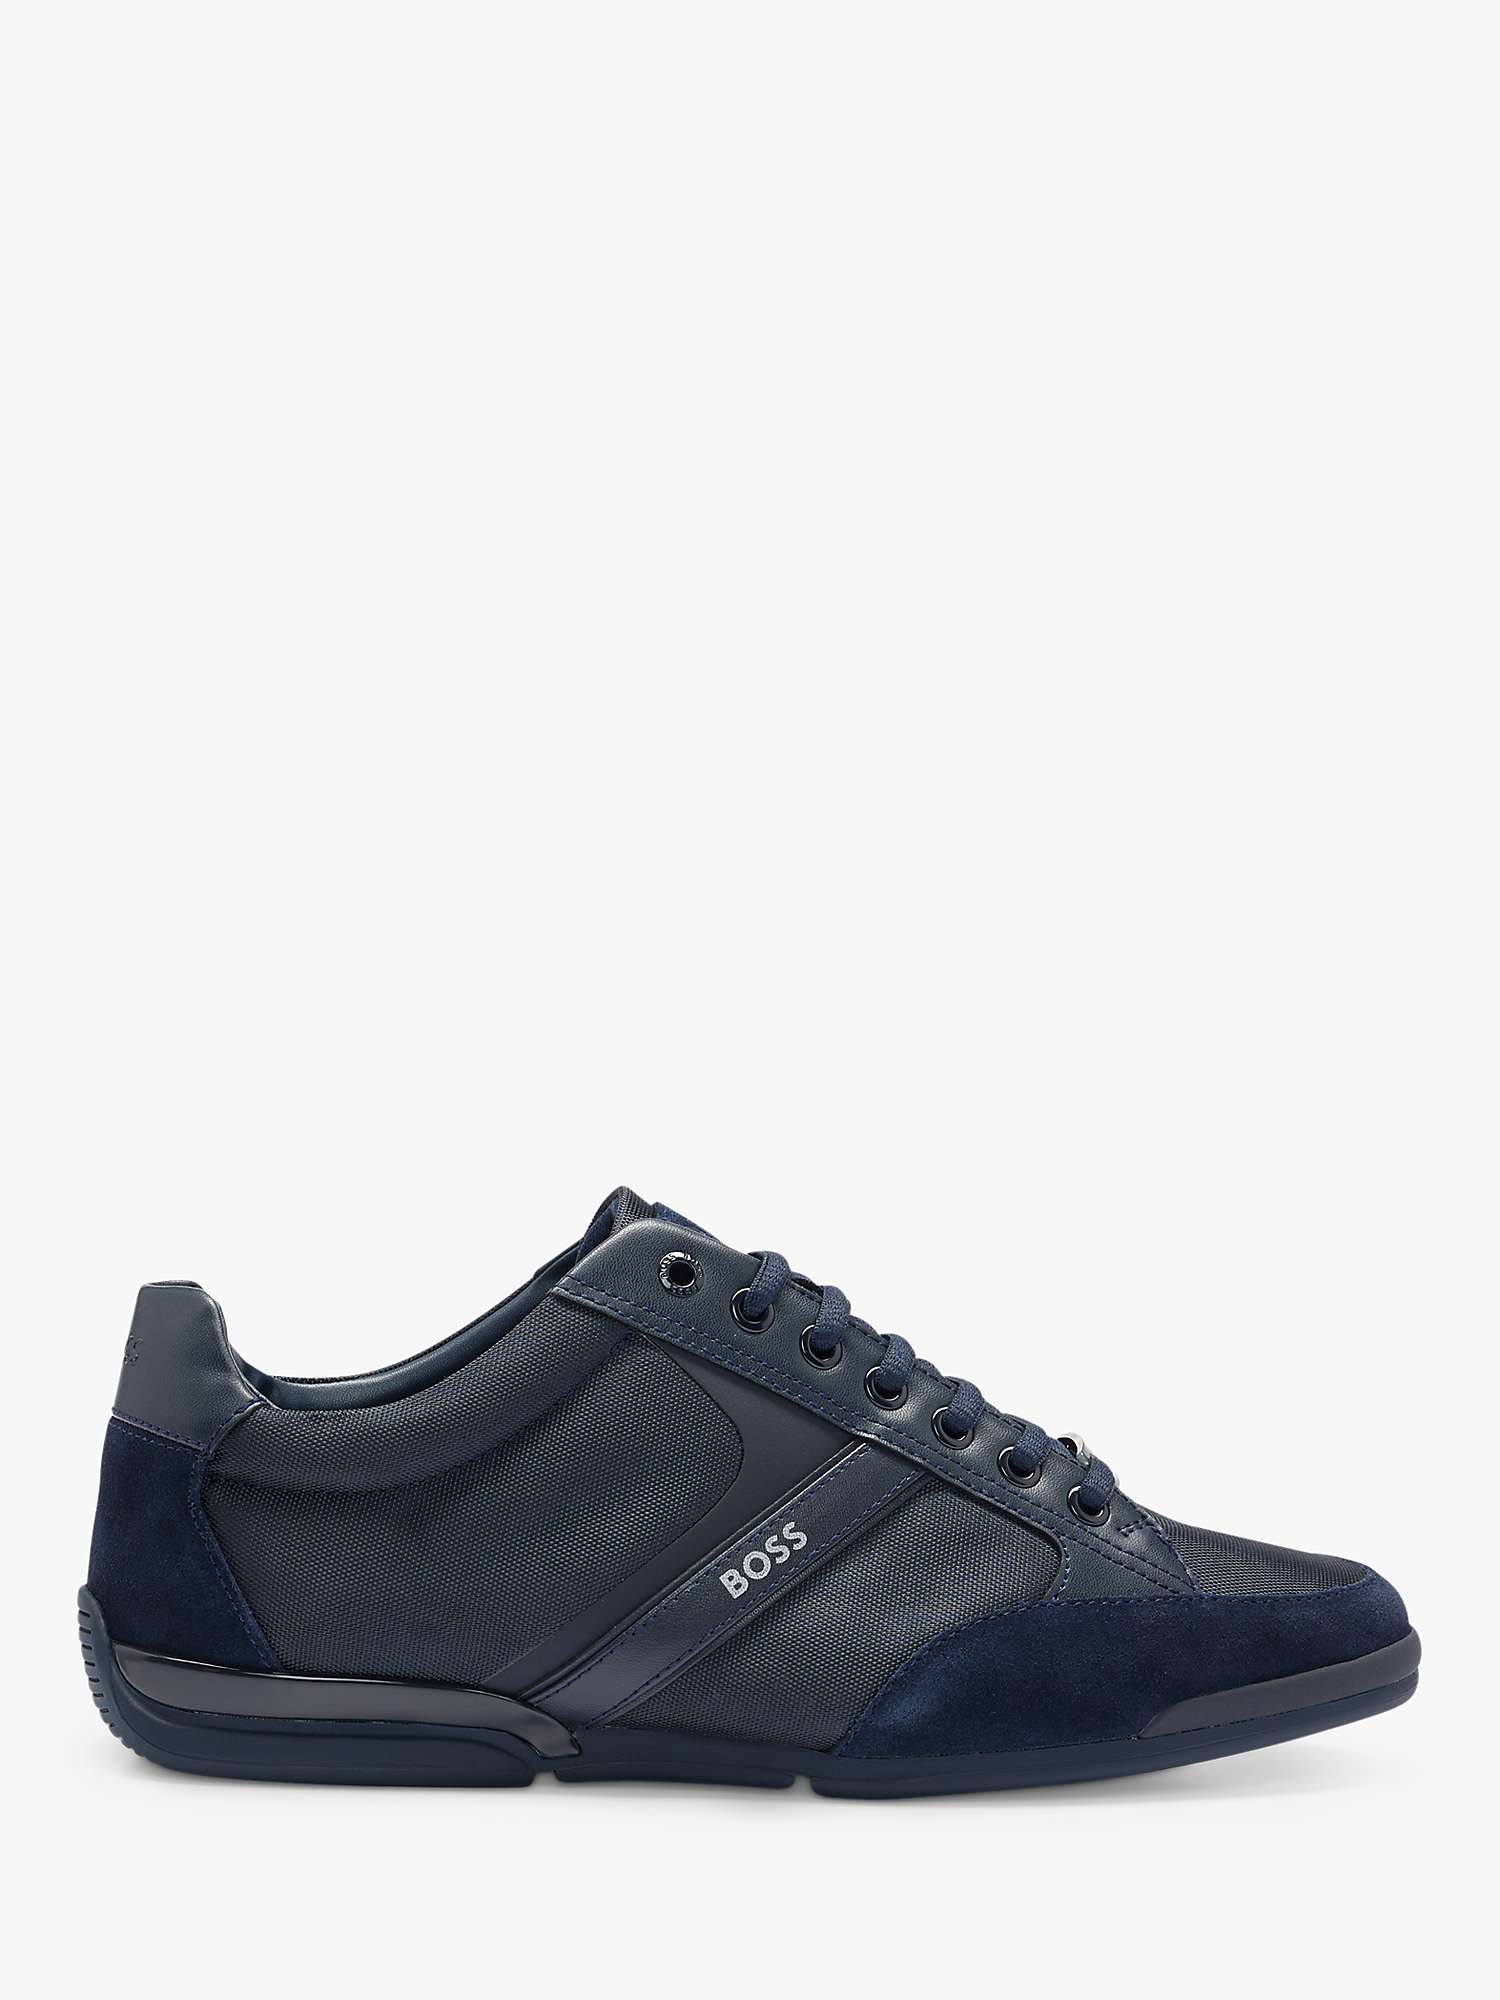 Buy HUGO BOSS Saturn 401 Lace Up Trainers, Dark Blue Online at johnlewis.com